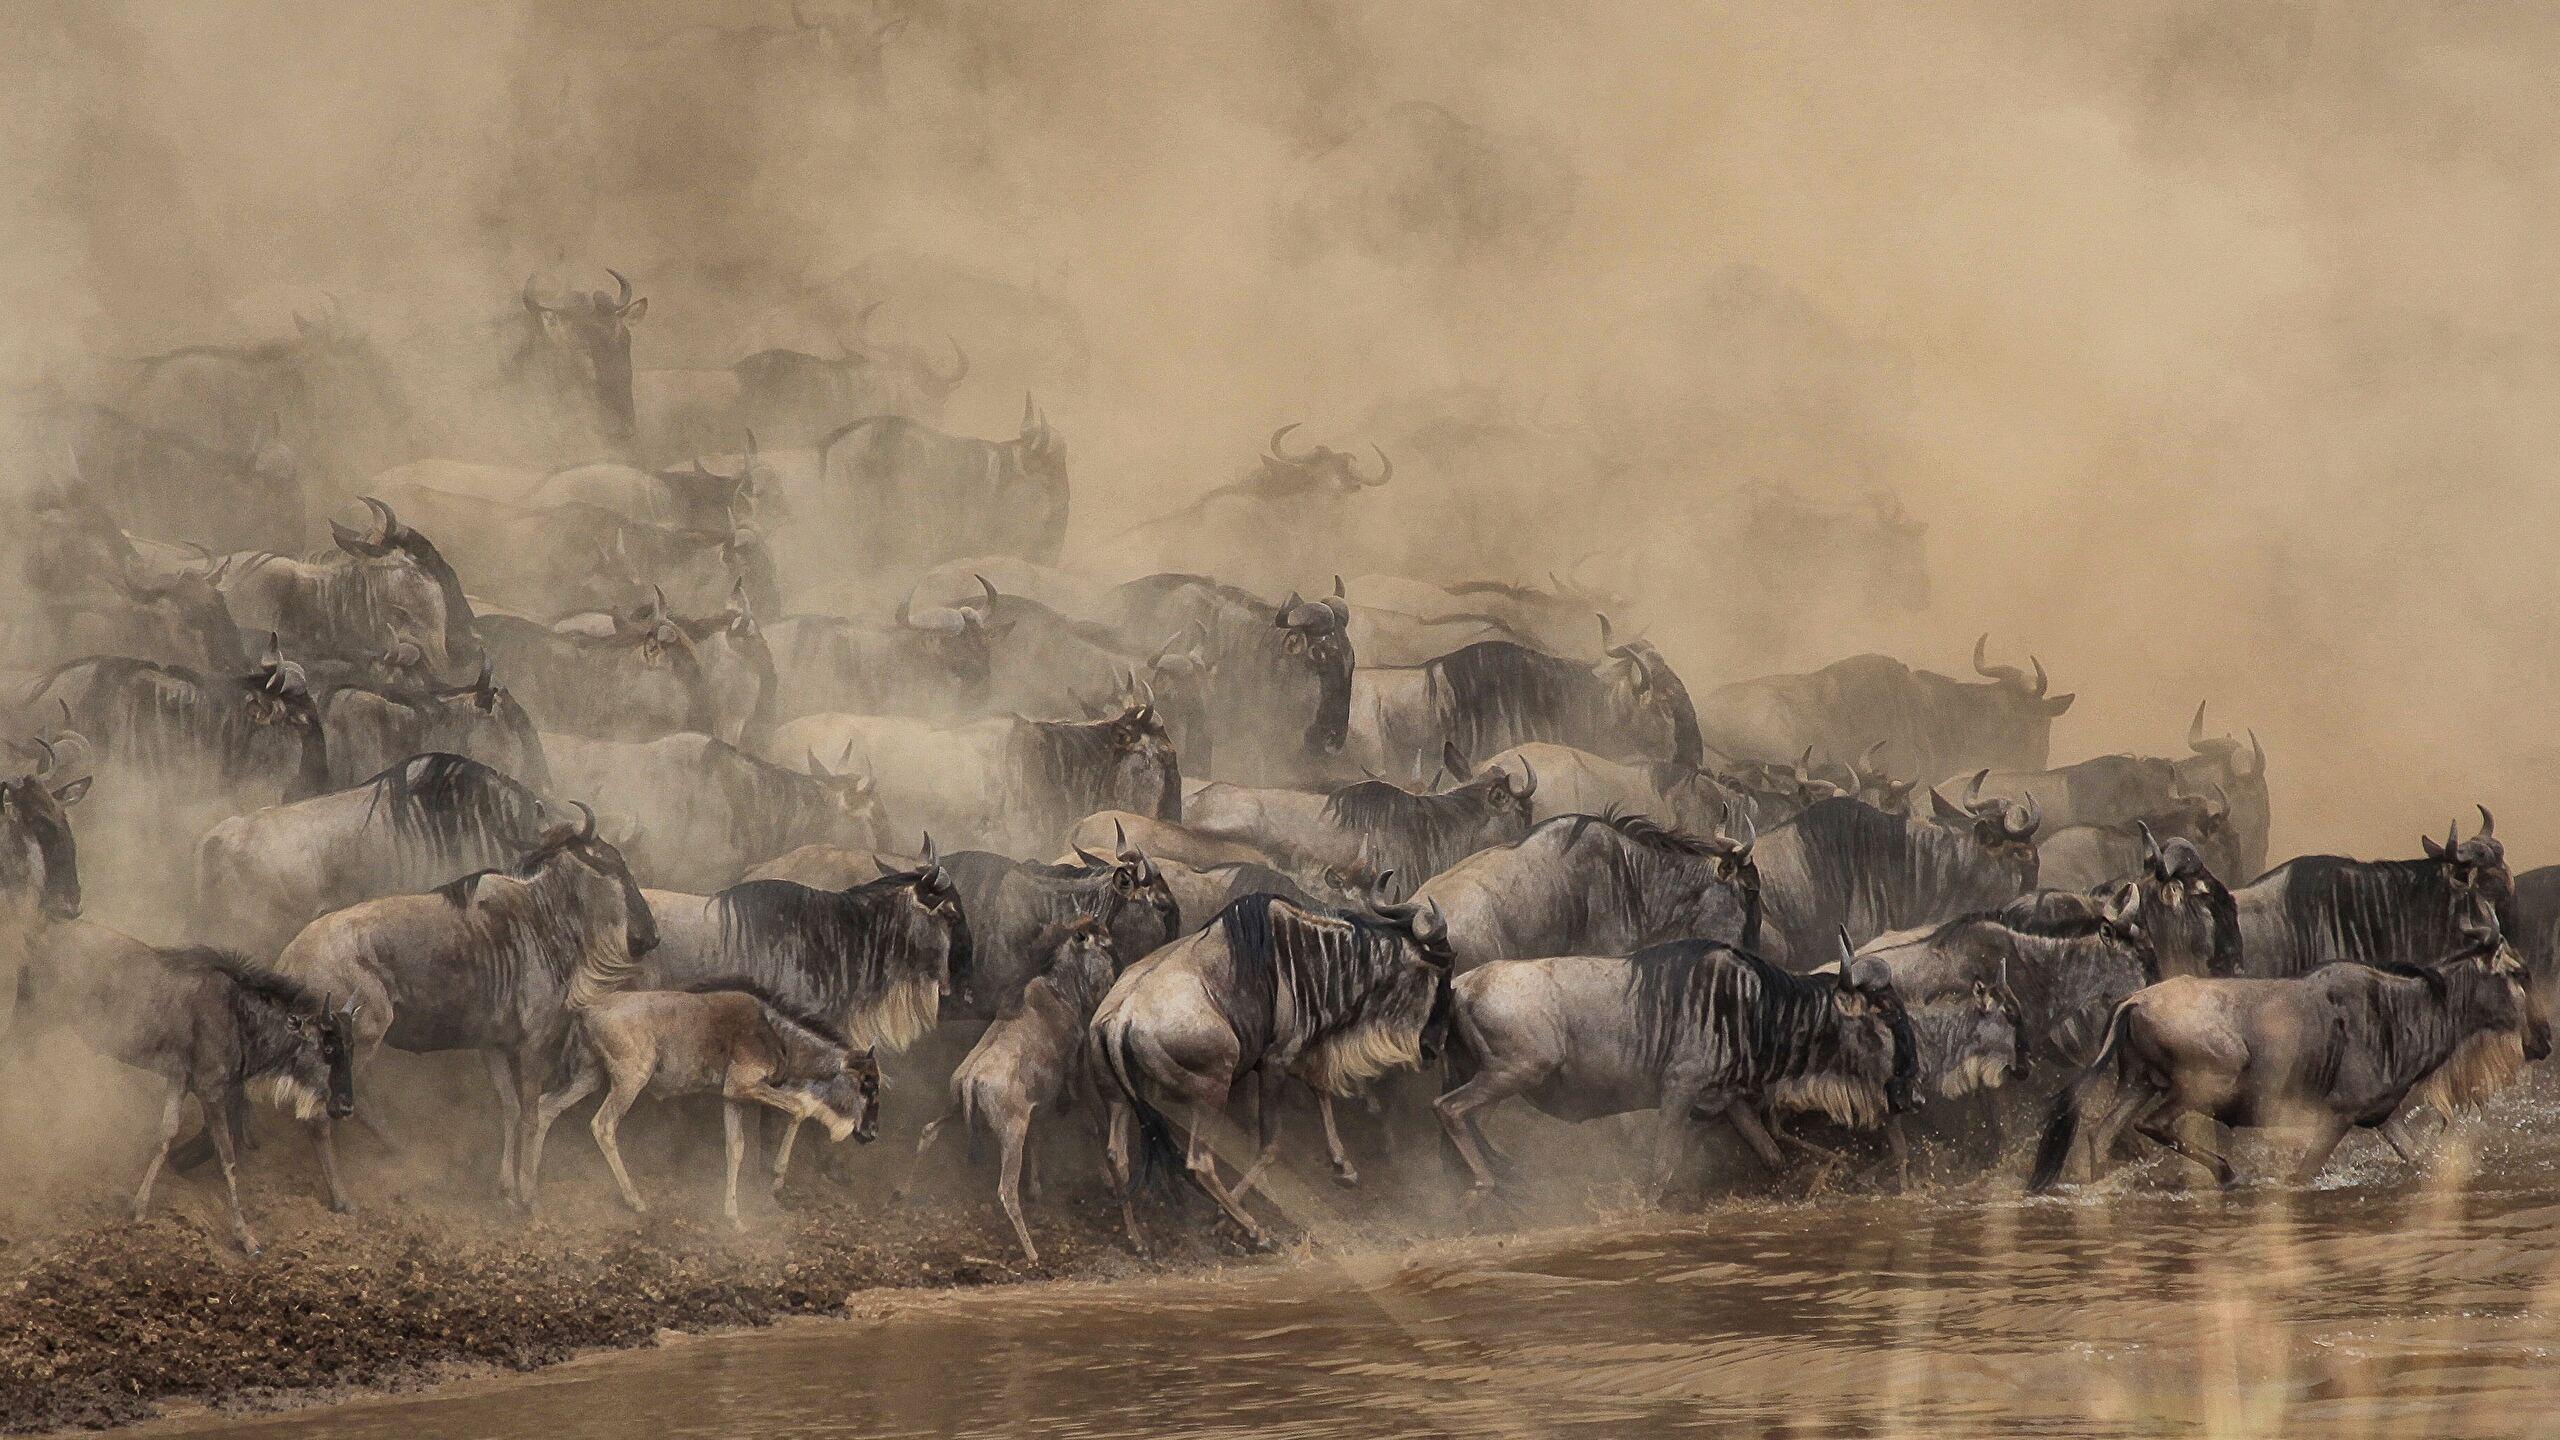 Wildebeest 4K wallpaper for your desktop or mobile screen free and easy to download